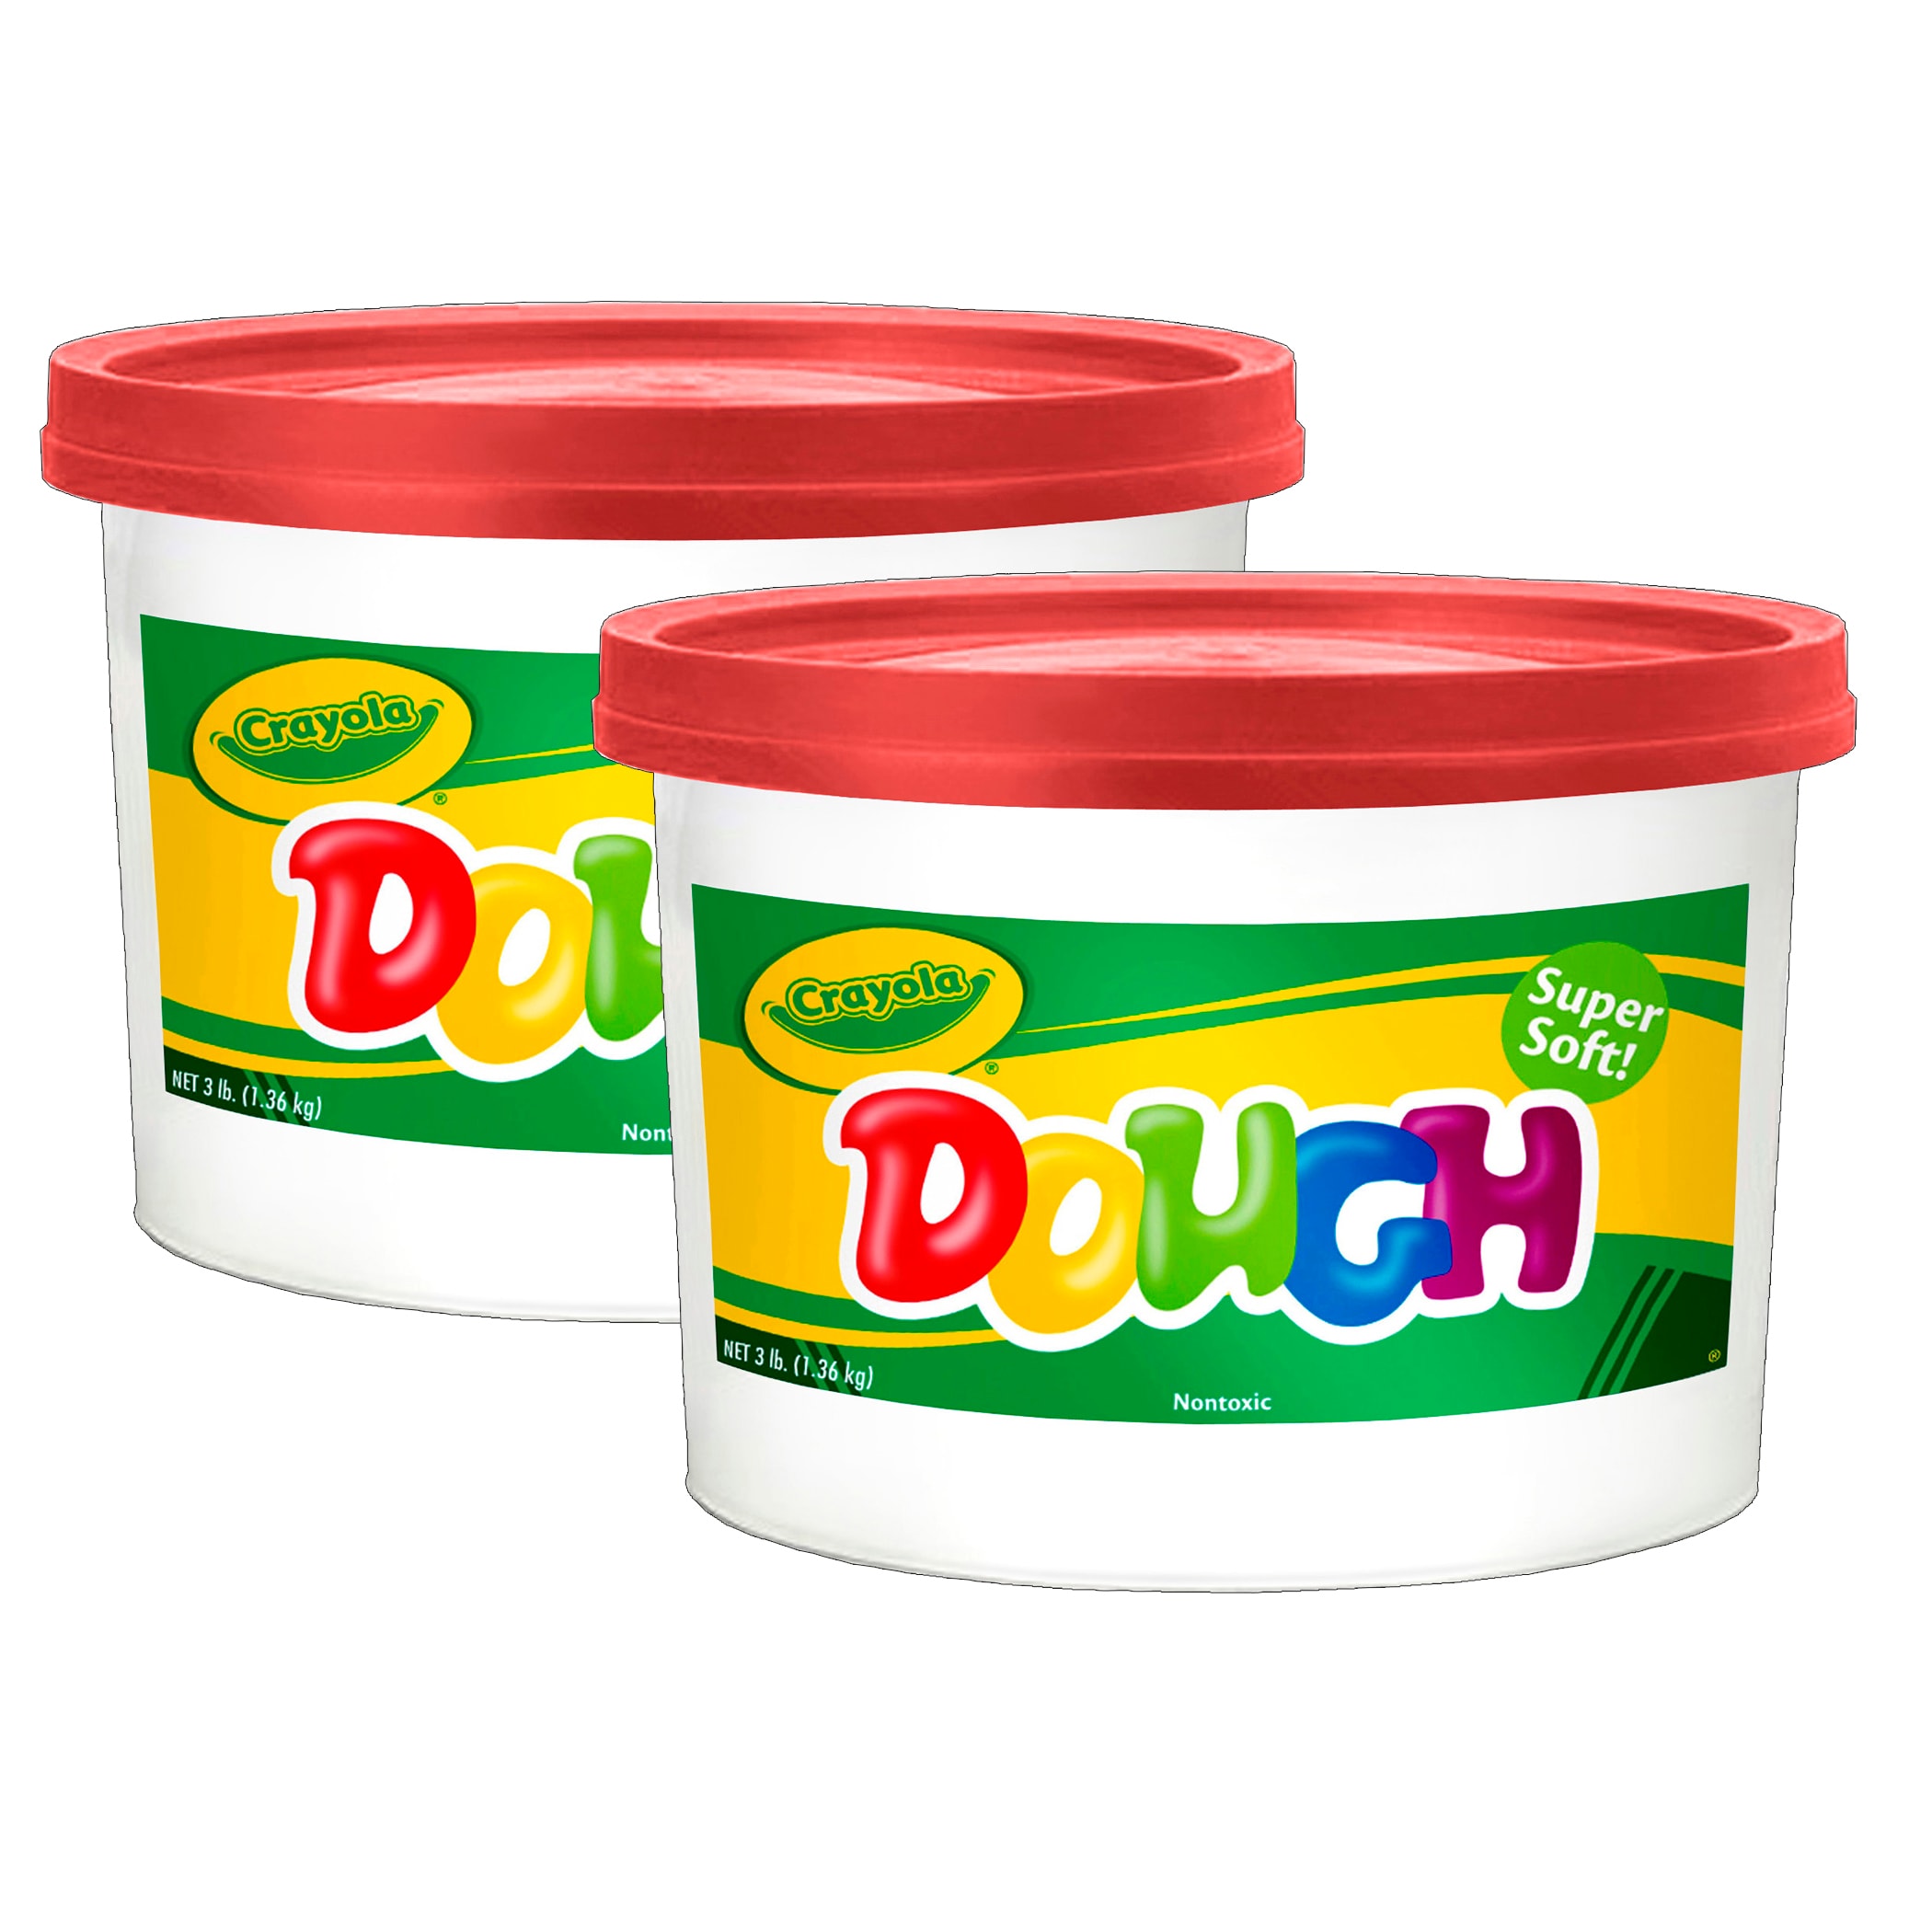 Baby Products Online - Play-Doh Bulk Paints Non-Toxic Modeling